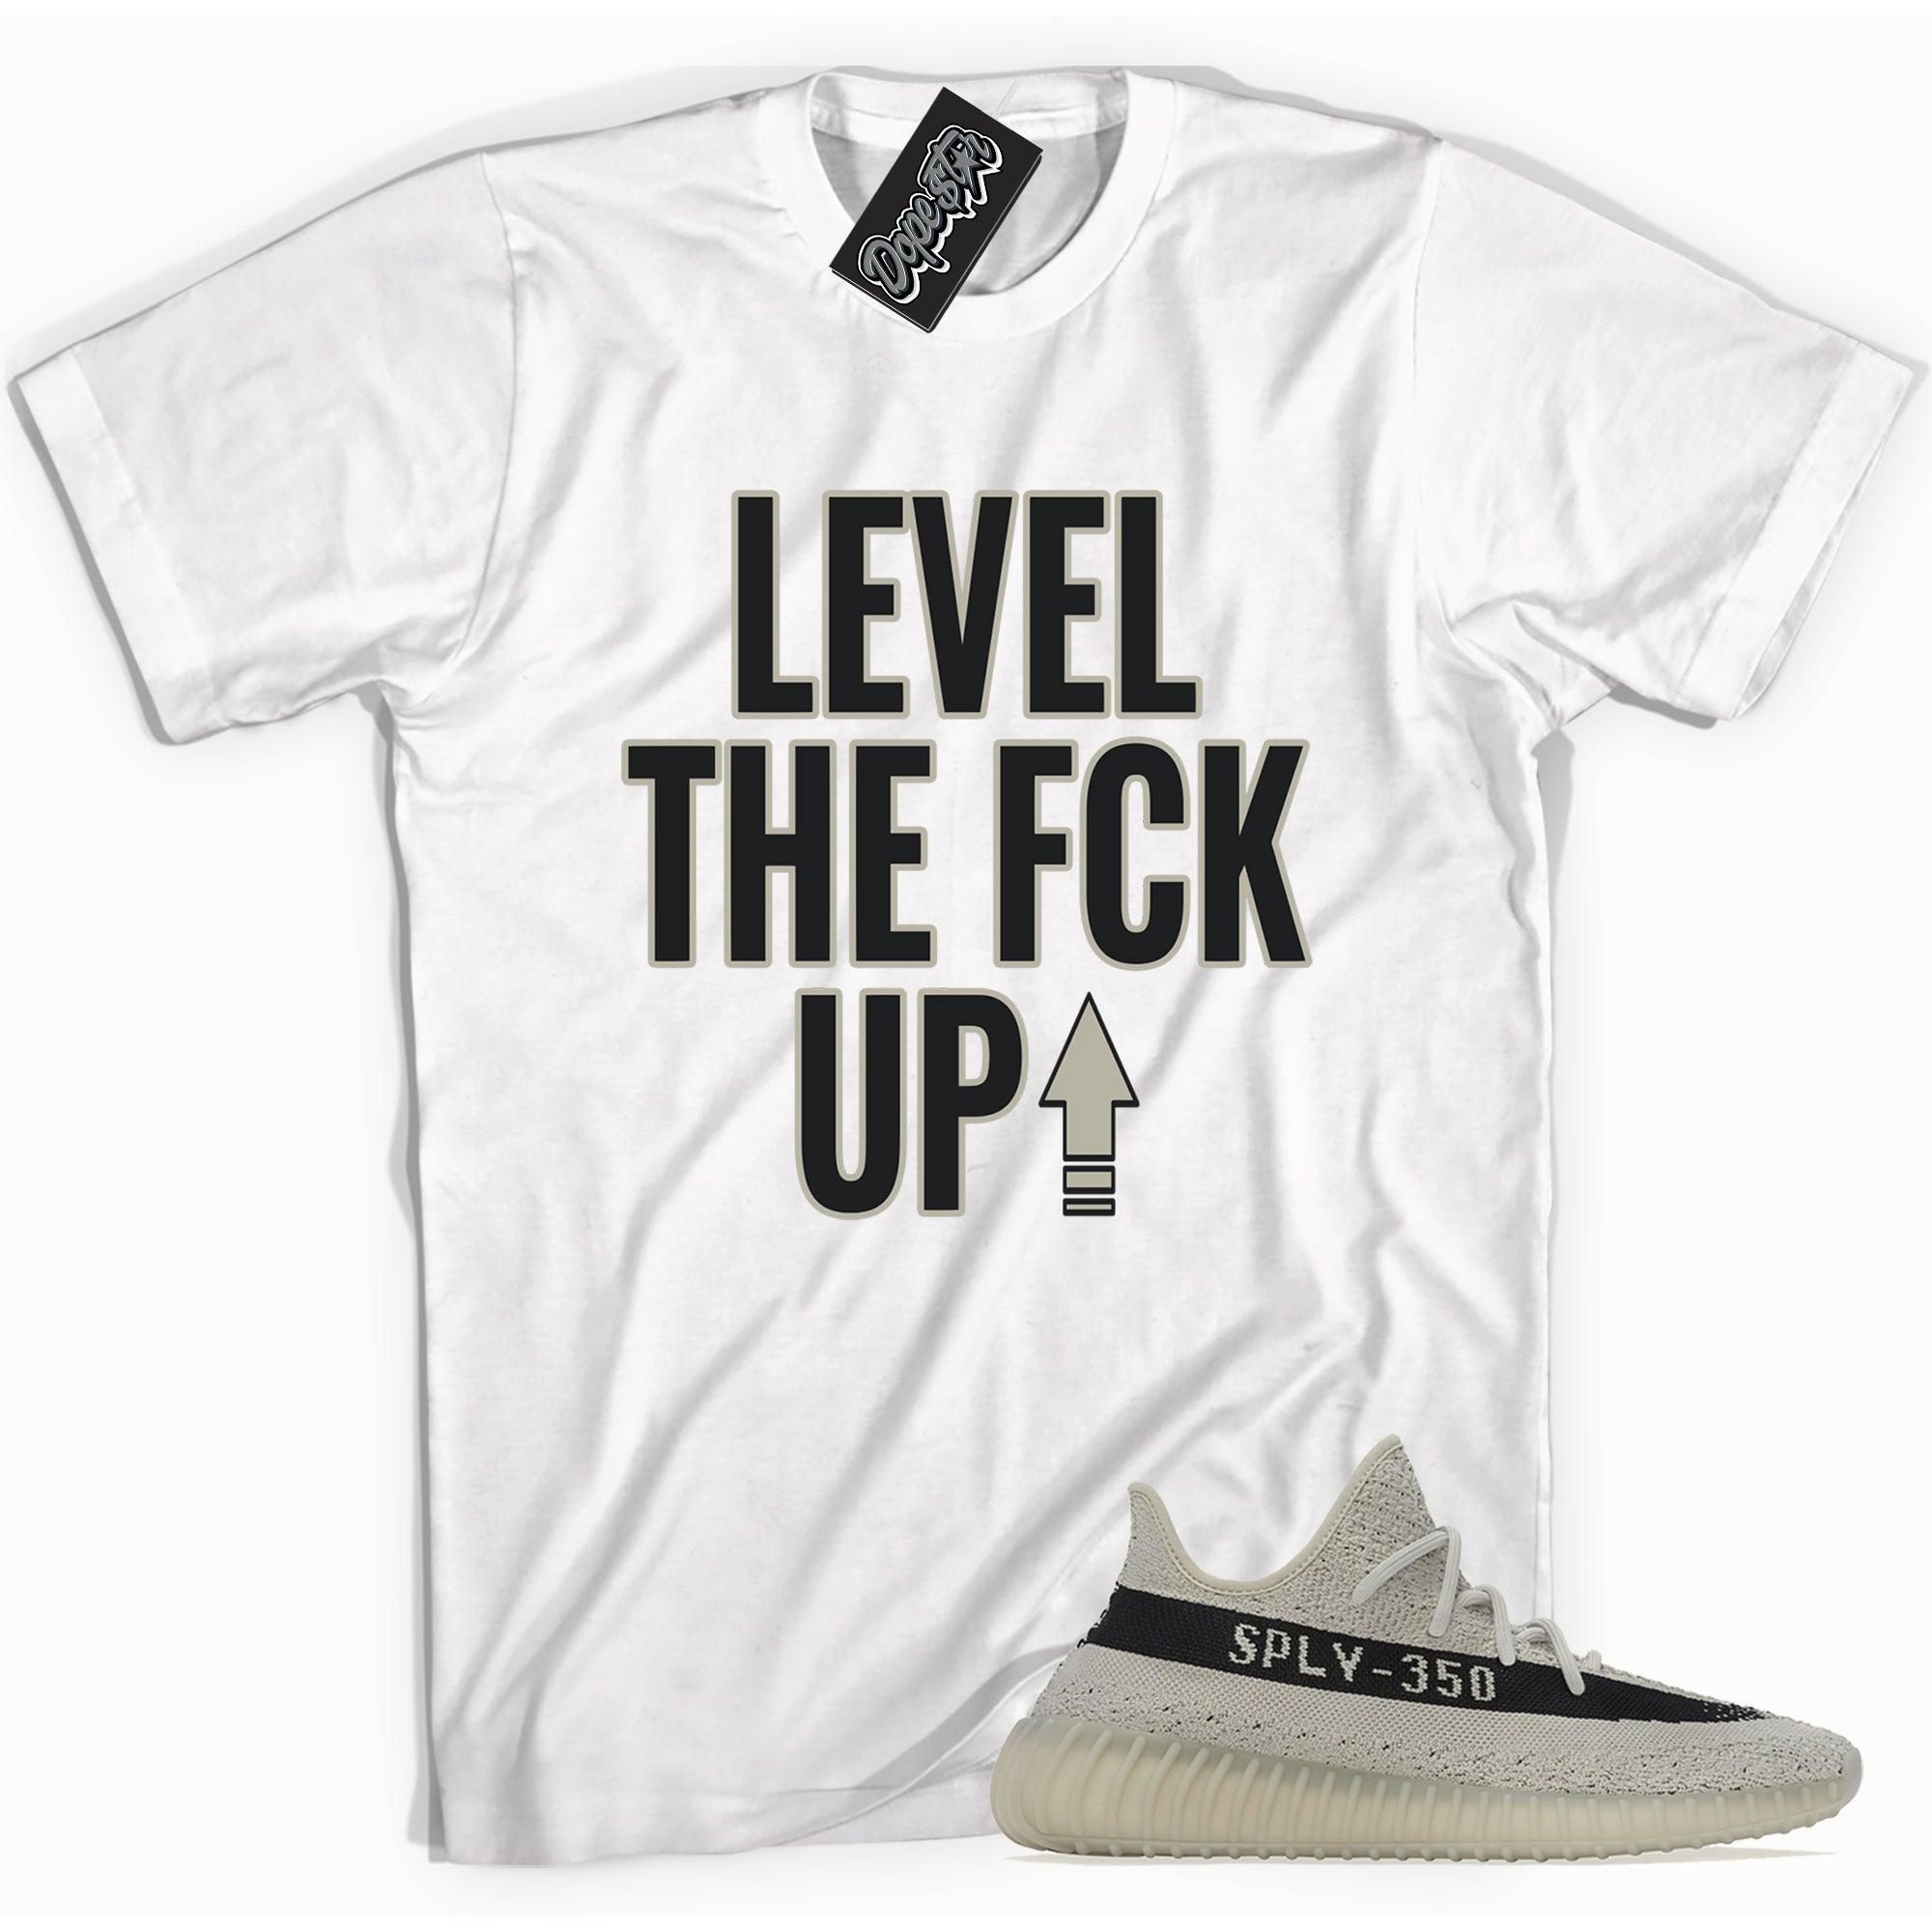 Cool white graphic tee with 'Level Up' print, that perfectly matches Adidas Yeezy Boost 350 V2 Slate sneakers.